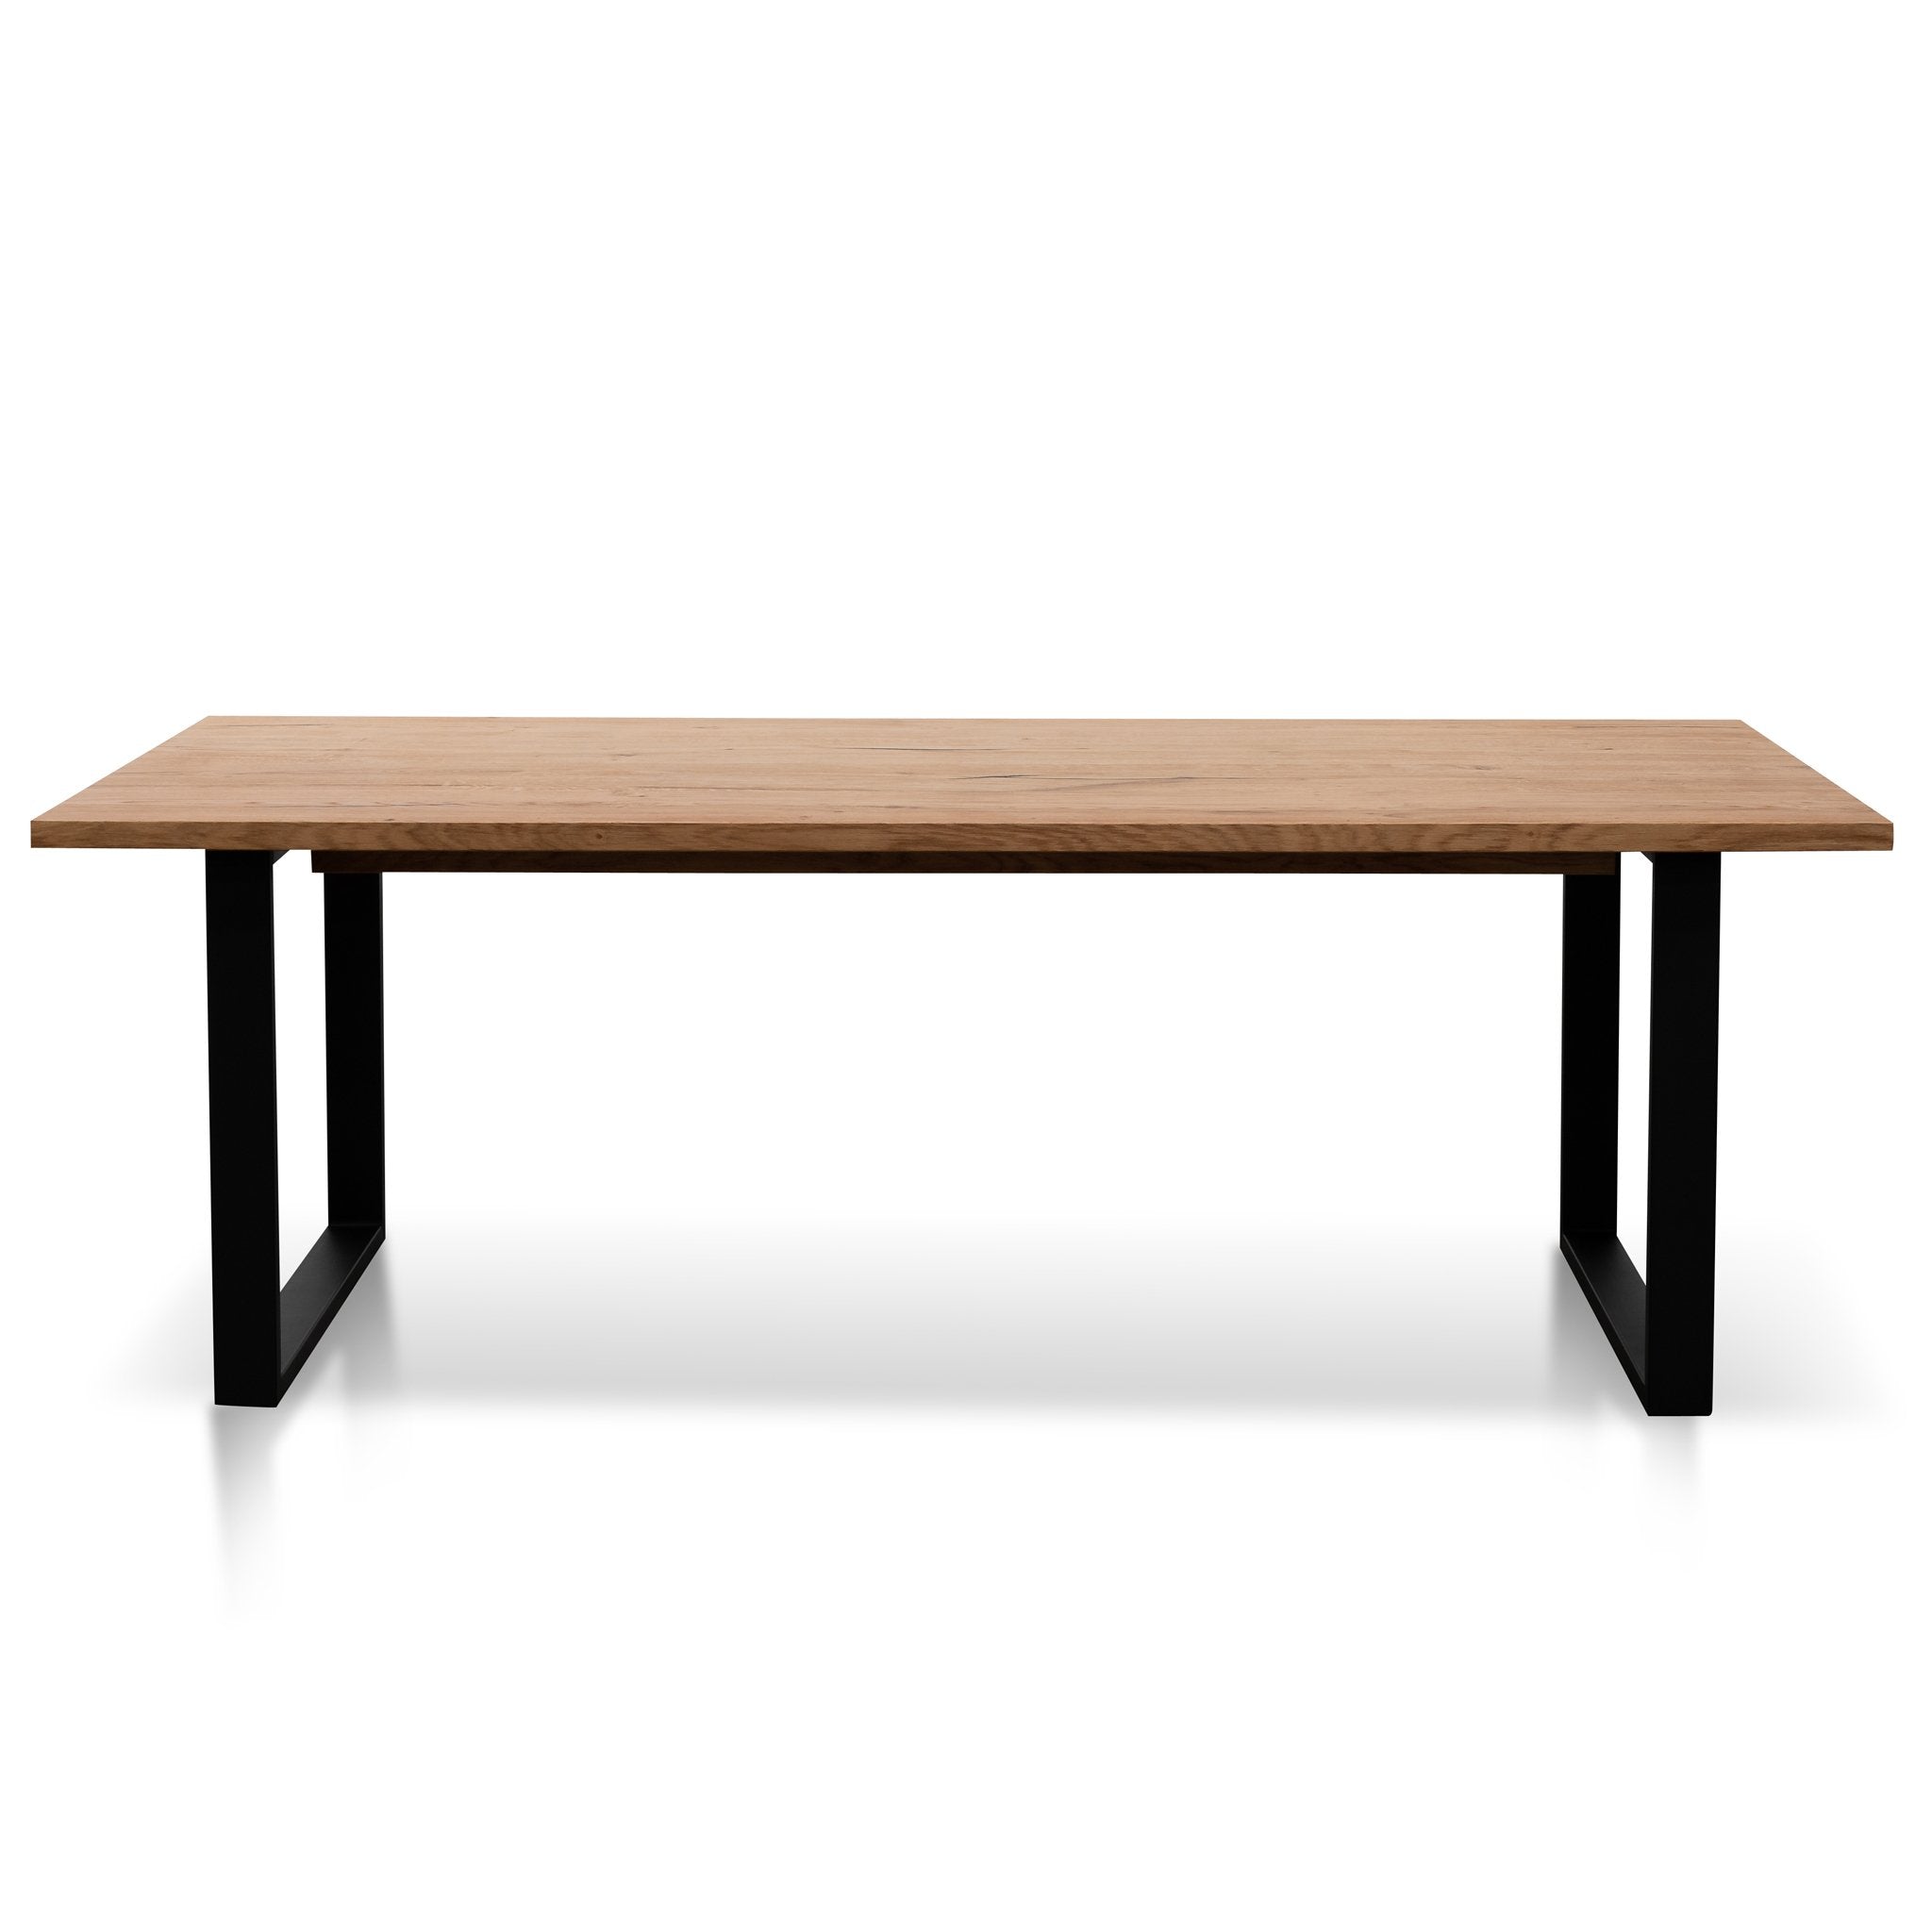 Damian 2.2m Straight Top Dining Table - Rustic Oak - Dining Tables